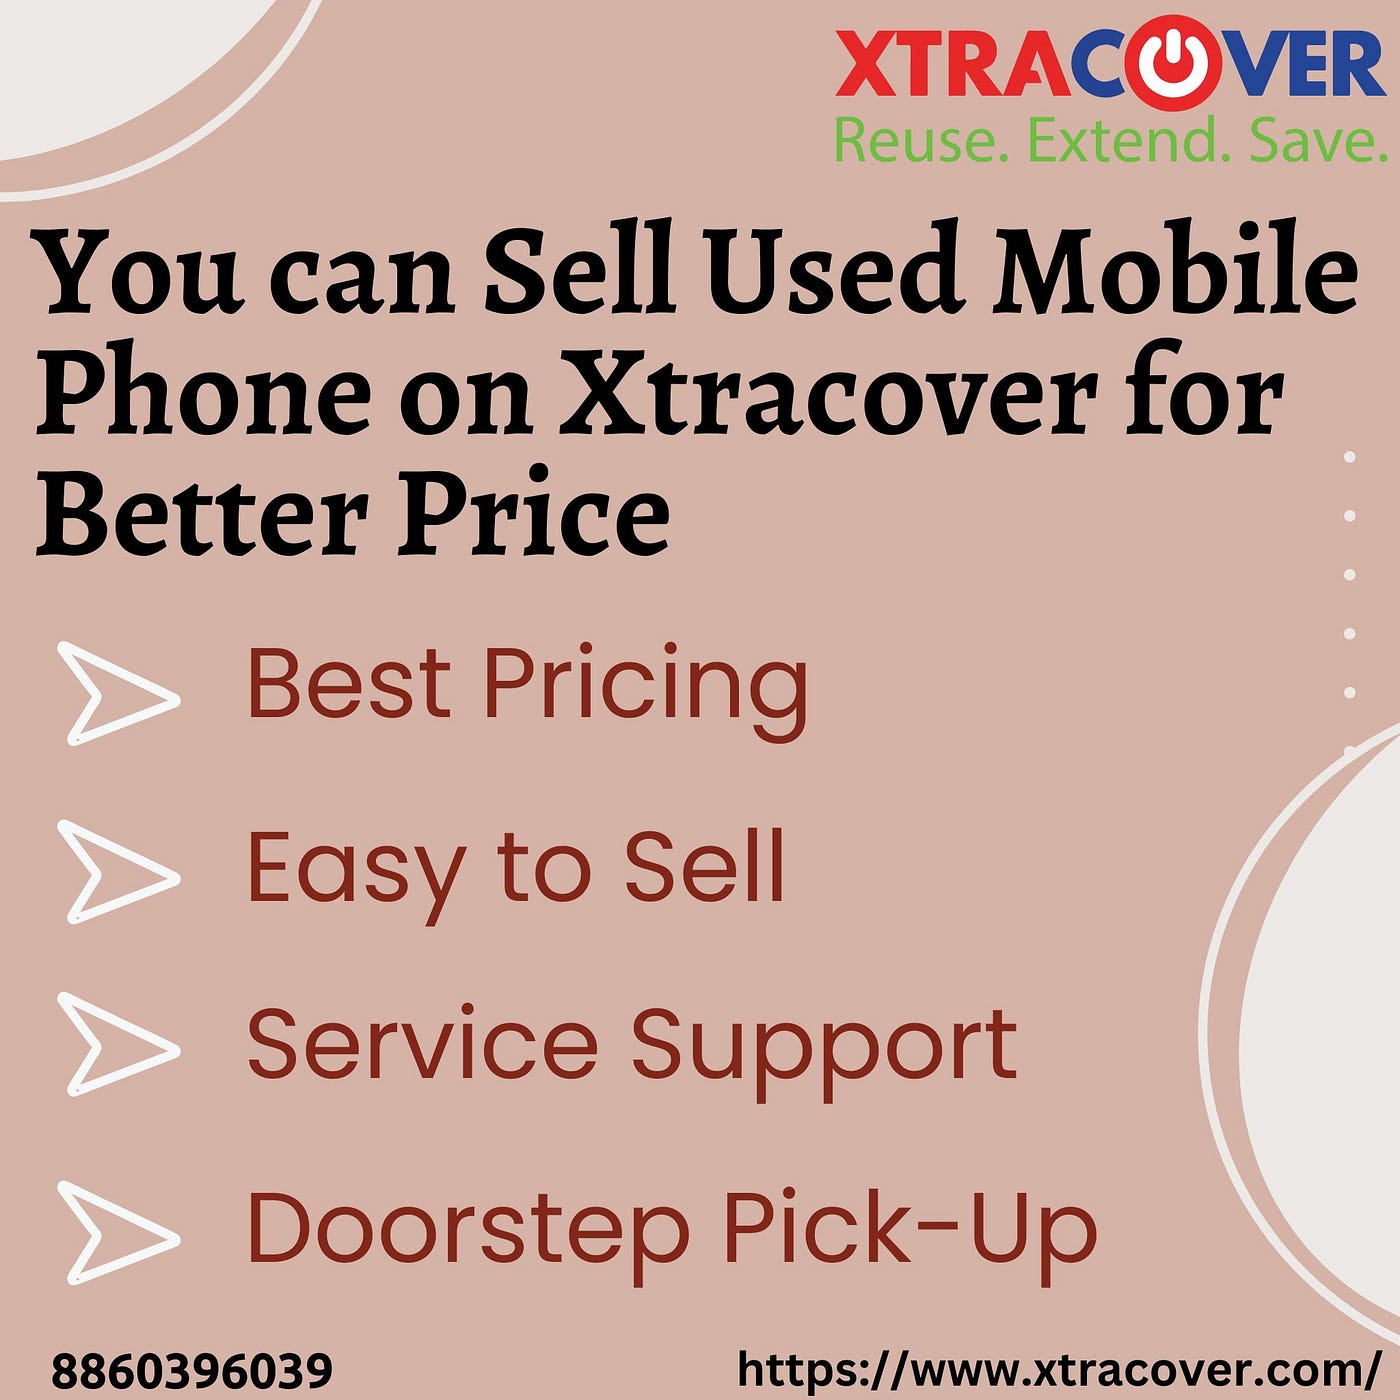 Sell Used Mobile Phone on Xtracover - Xtracover - Medium